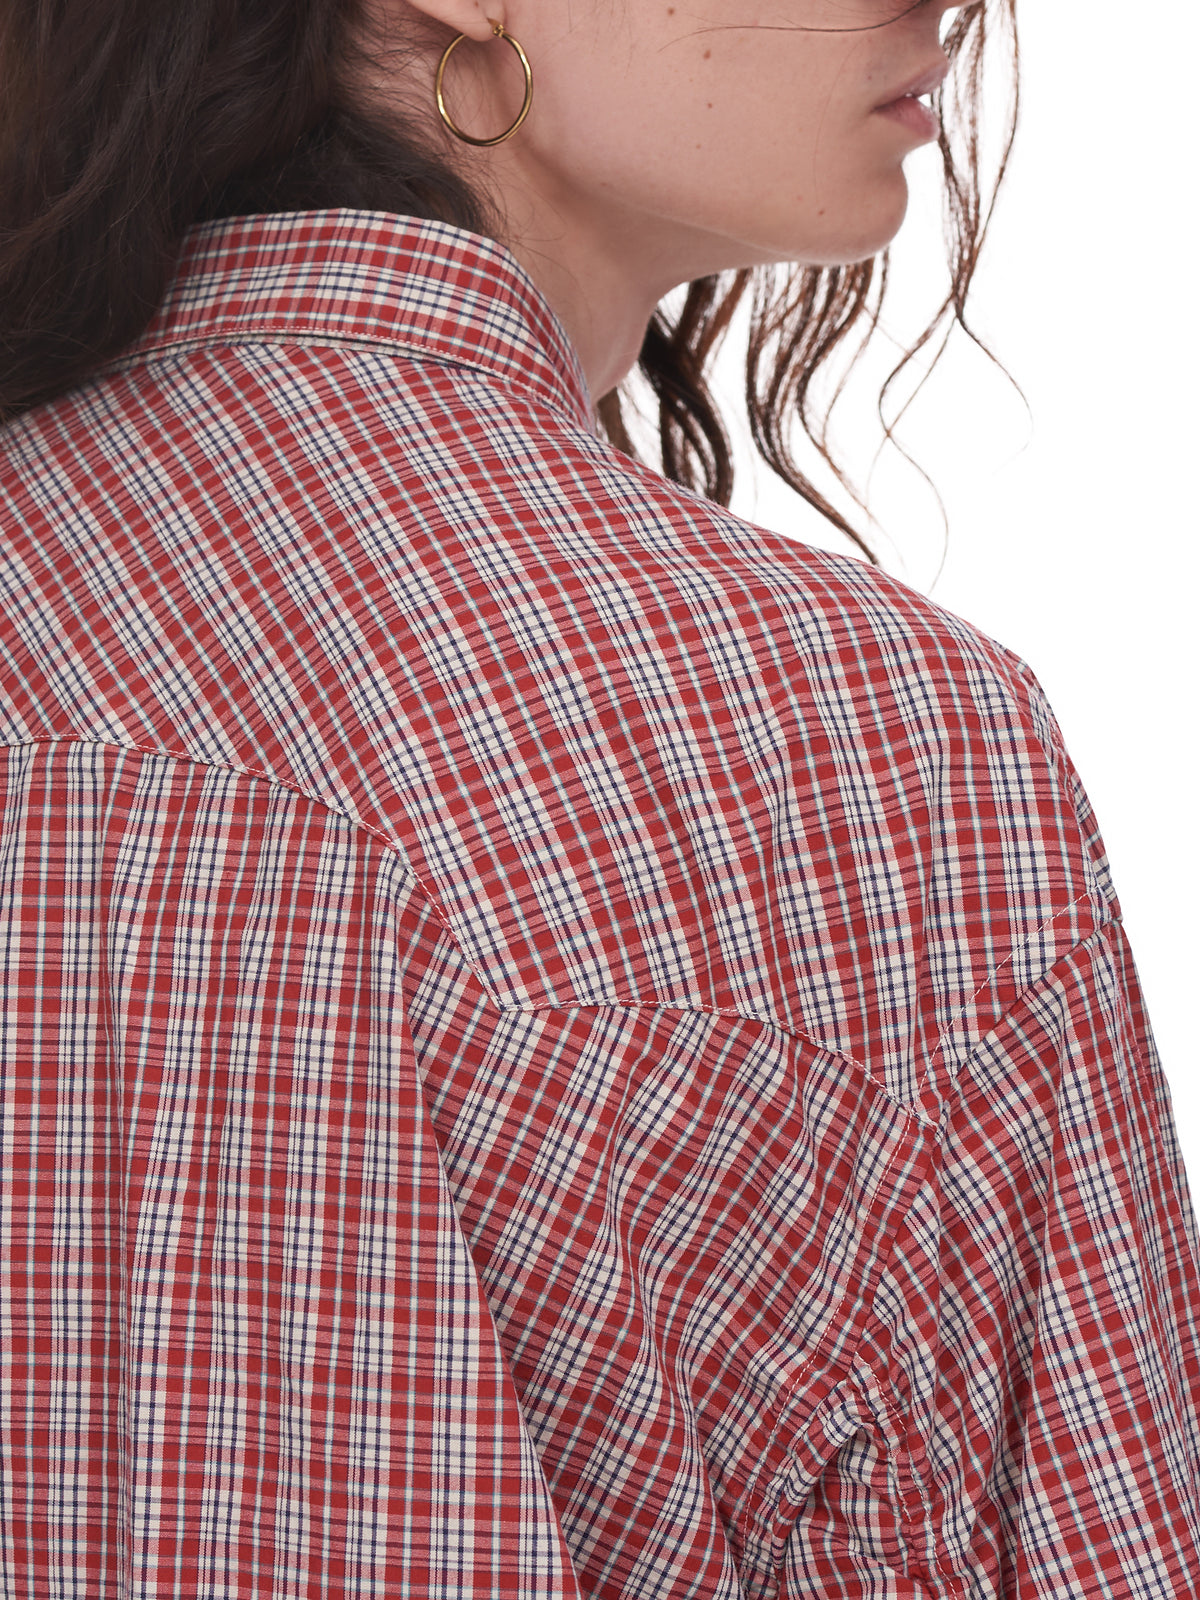 Undercover Plaid Top | H. Lorenzo - detail 